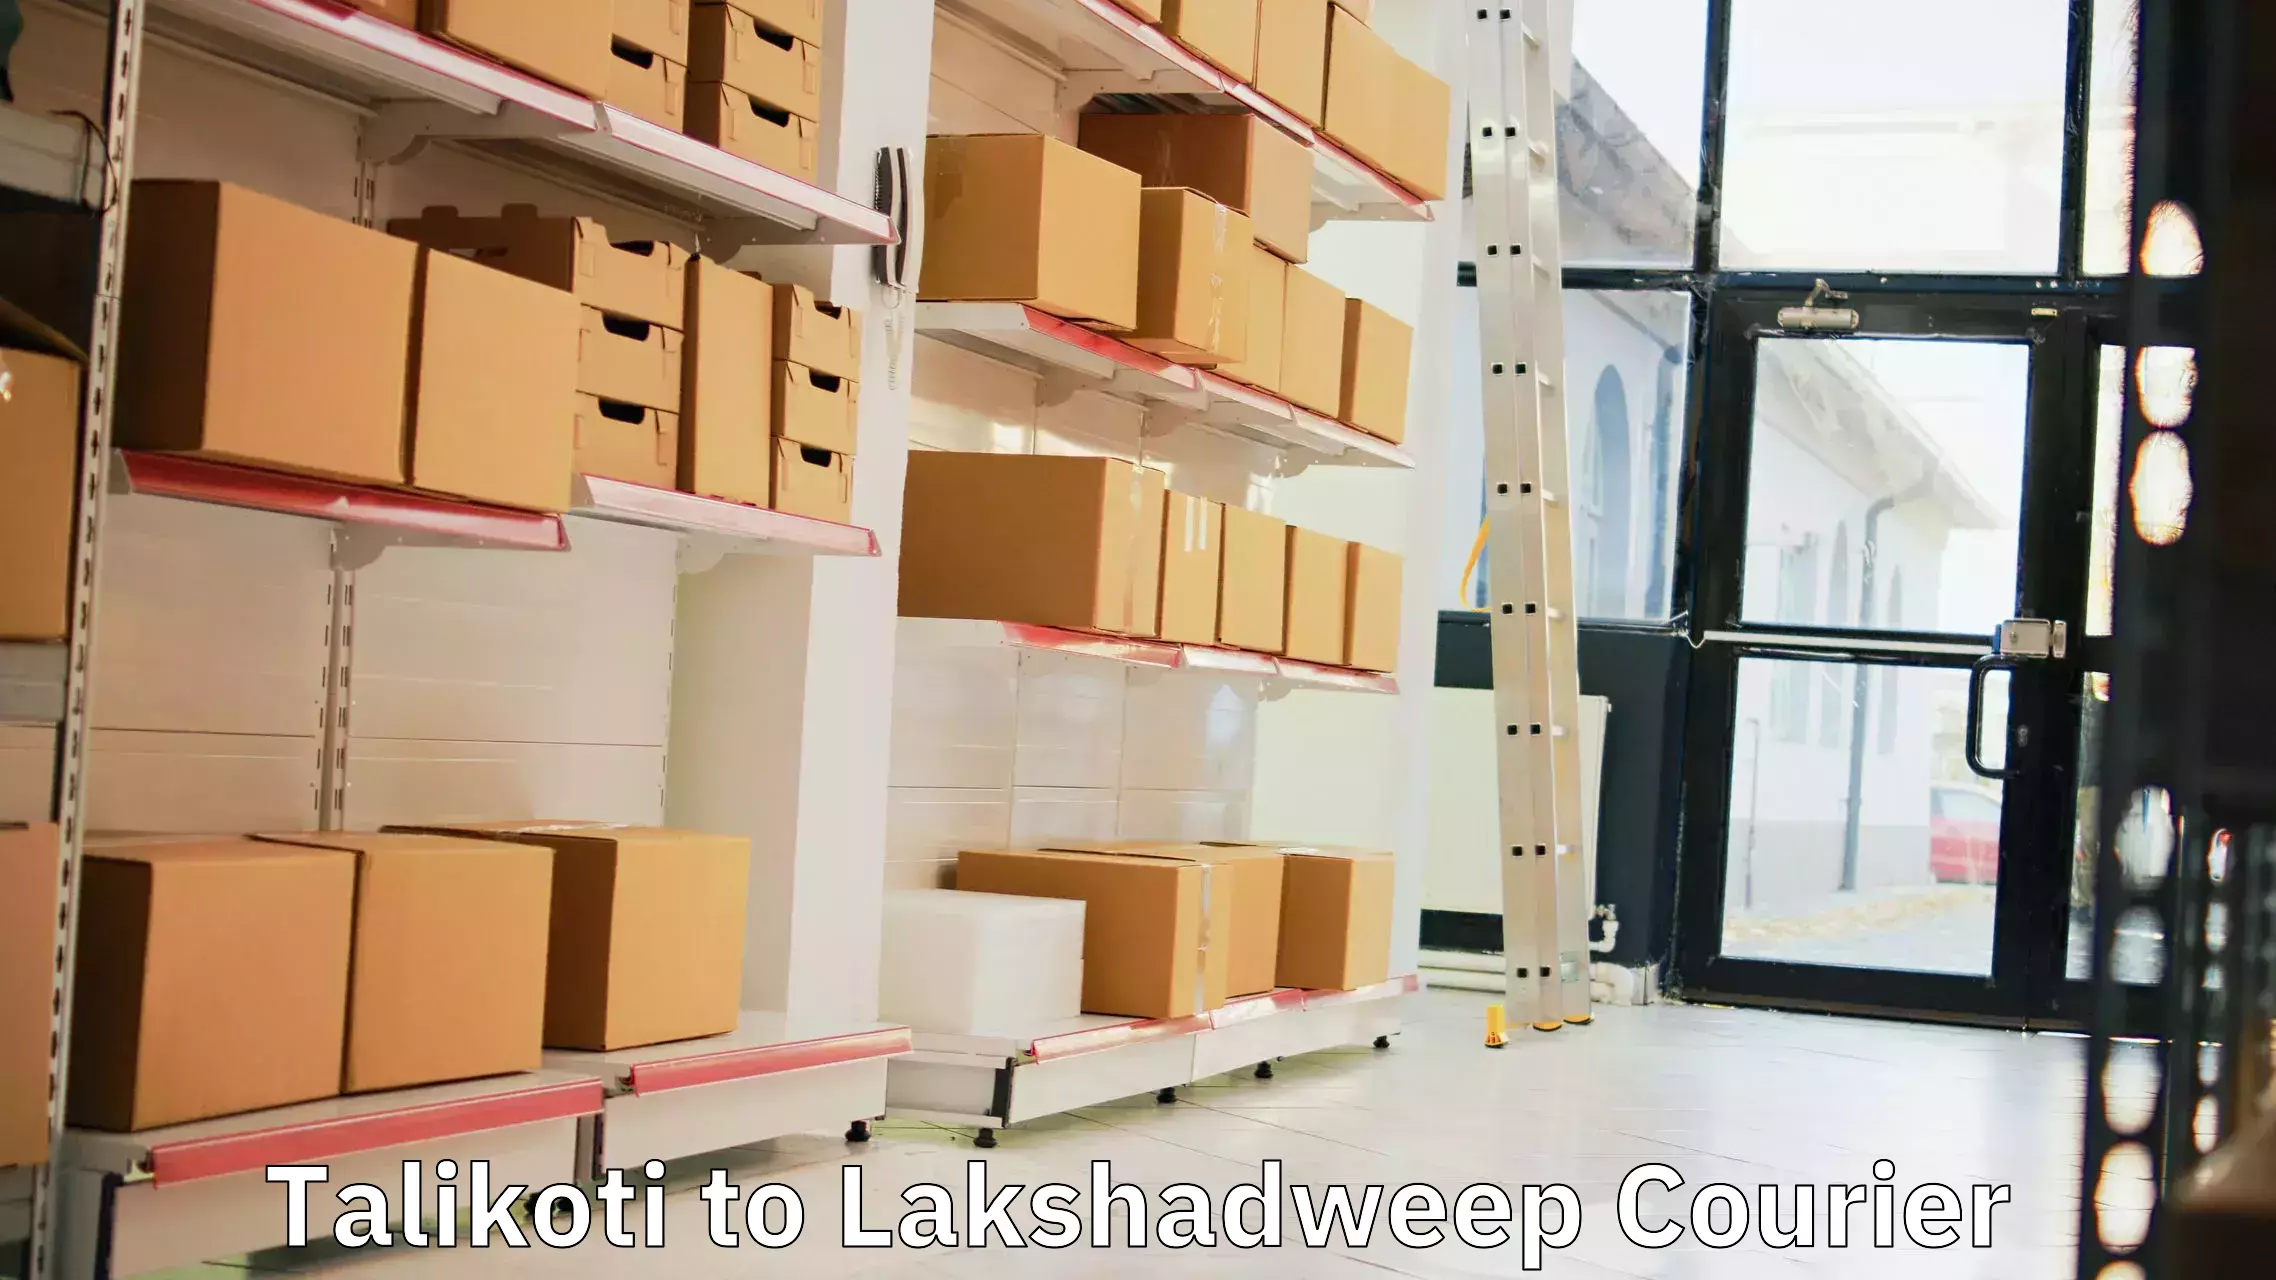 Multi-national courier services Talikoti to Lakshadweep